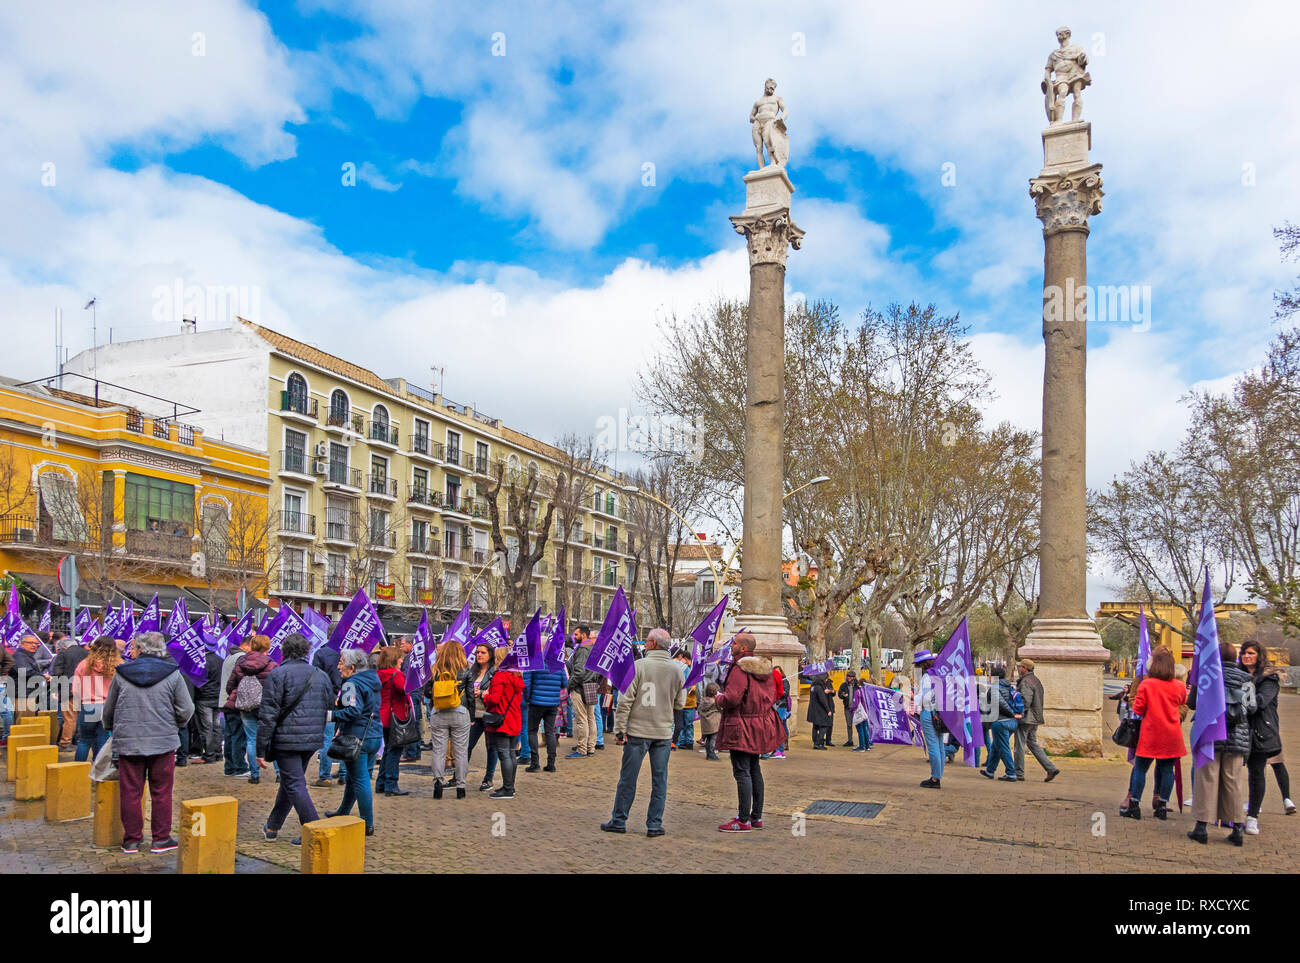 March 8, 2019, Day of the Woman, a demonstration in Spain for equal rights for all genders​ Stock Photo